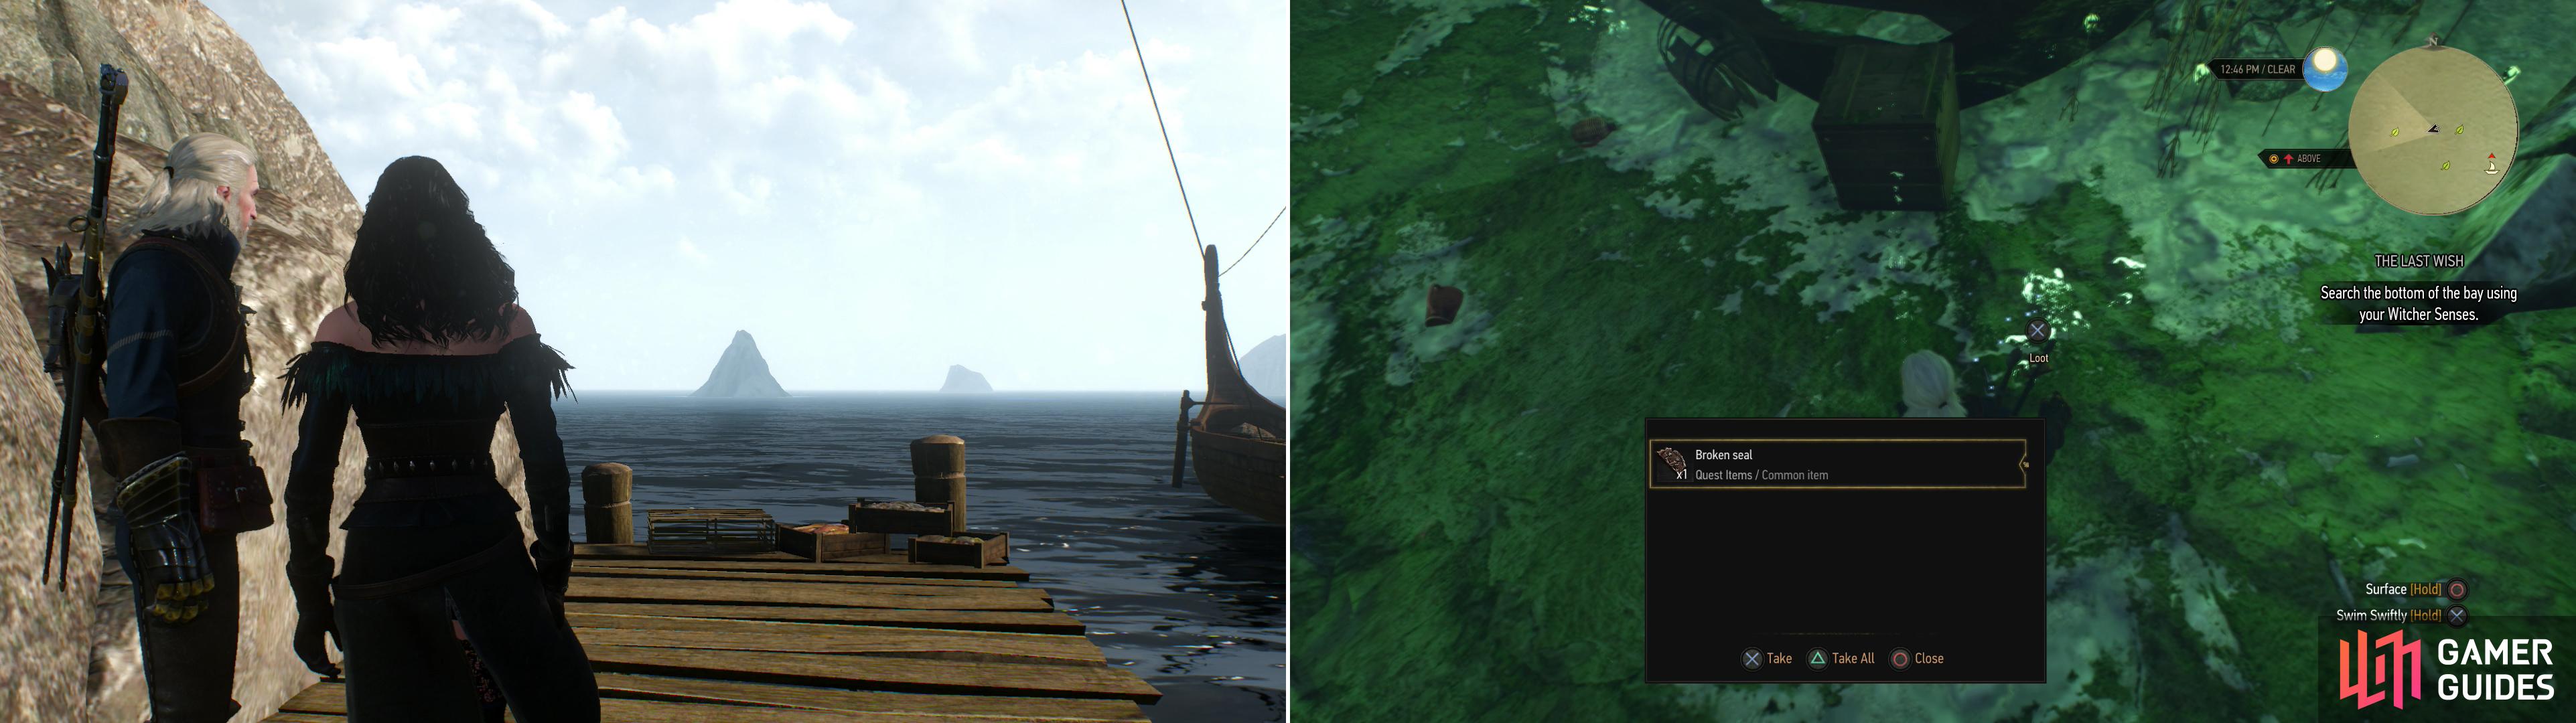 Yennefer's continuing fascination will see you two search the sea for clues that might lead her to an elusive and powerful Djinn (left). Of course, it'll be Geralt who actually has to get wet (right).